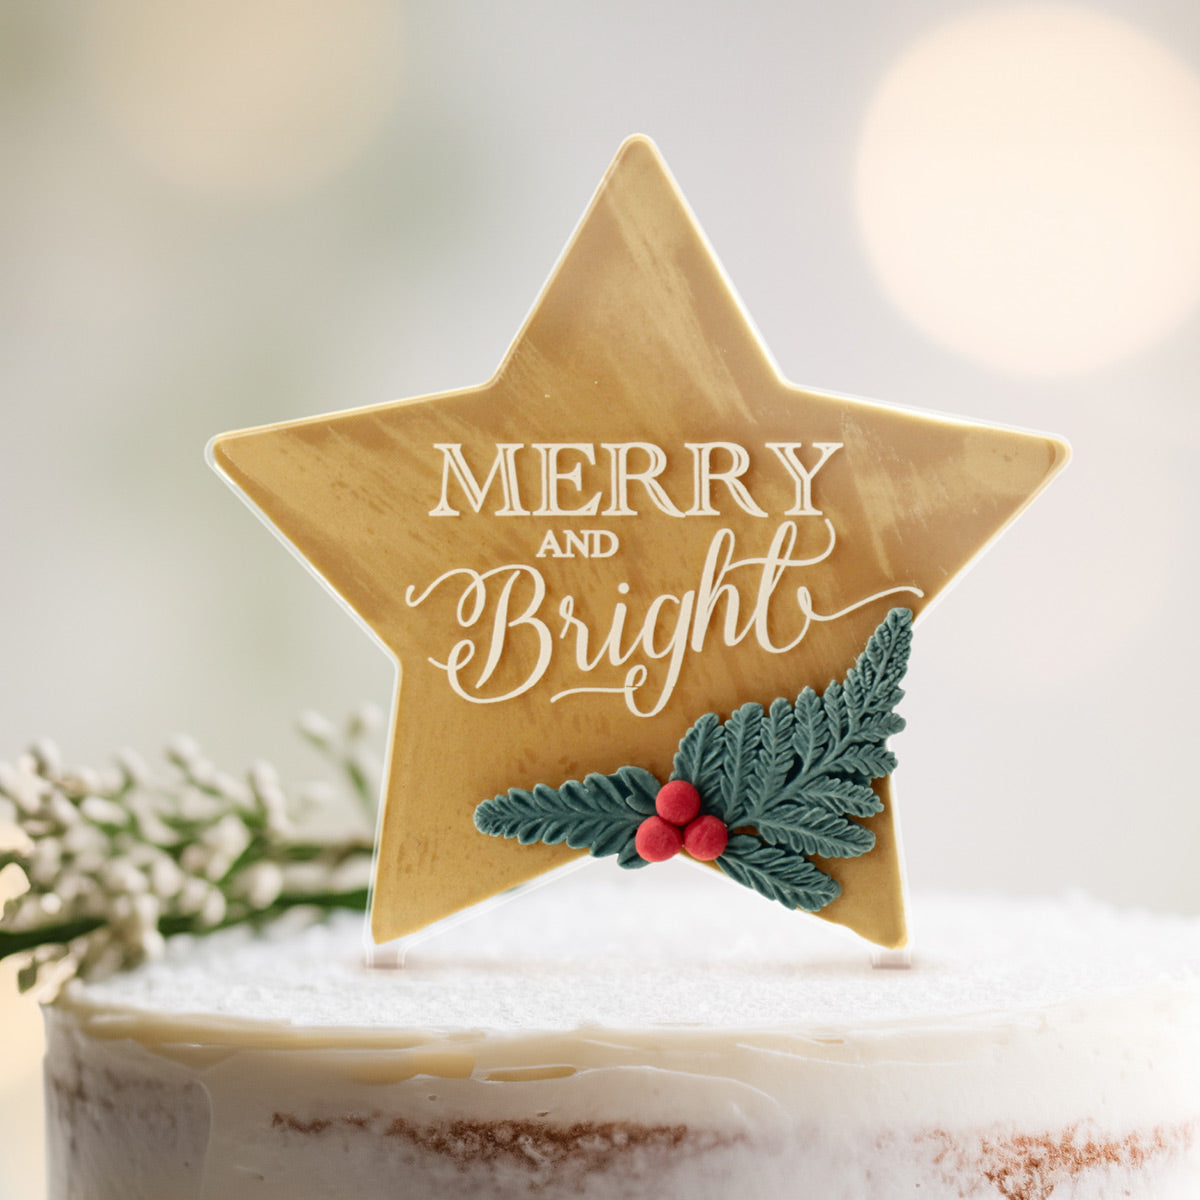 Merry and Bright Clear Acrylic Star Topper - White Wording